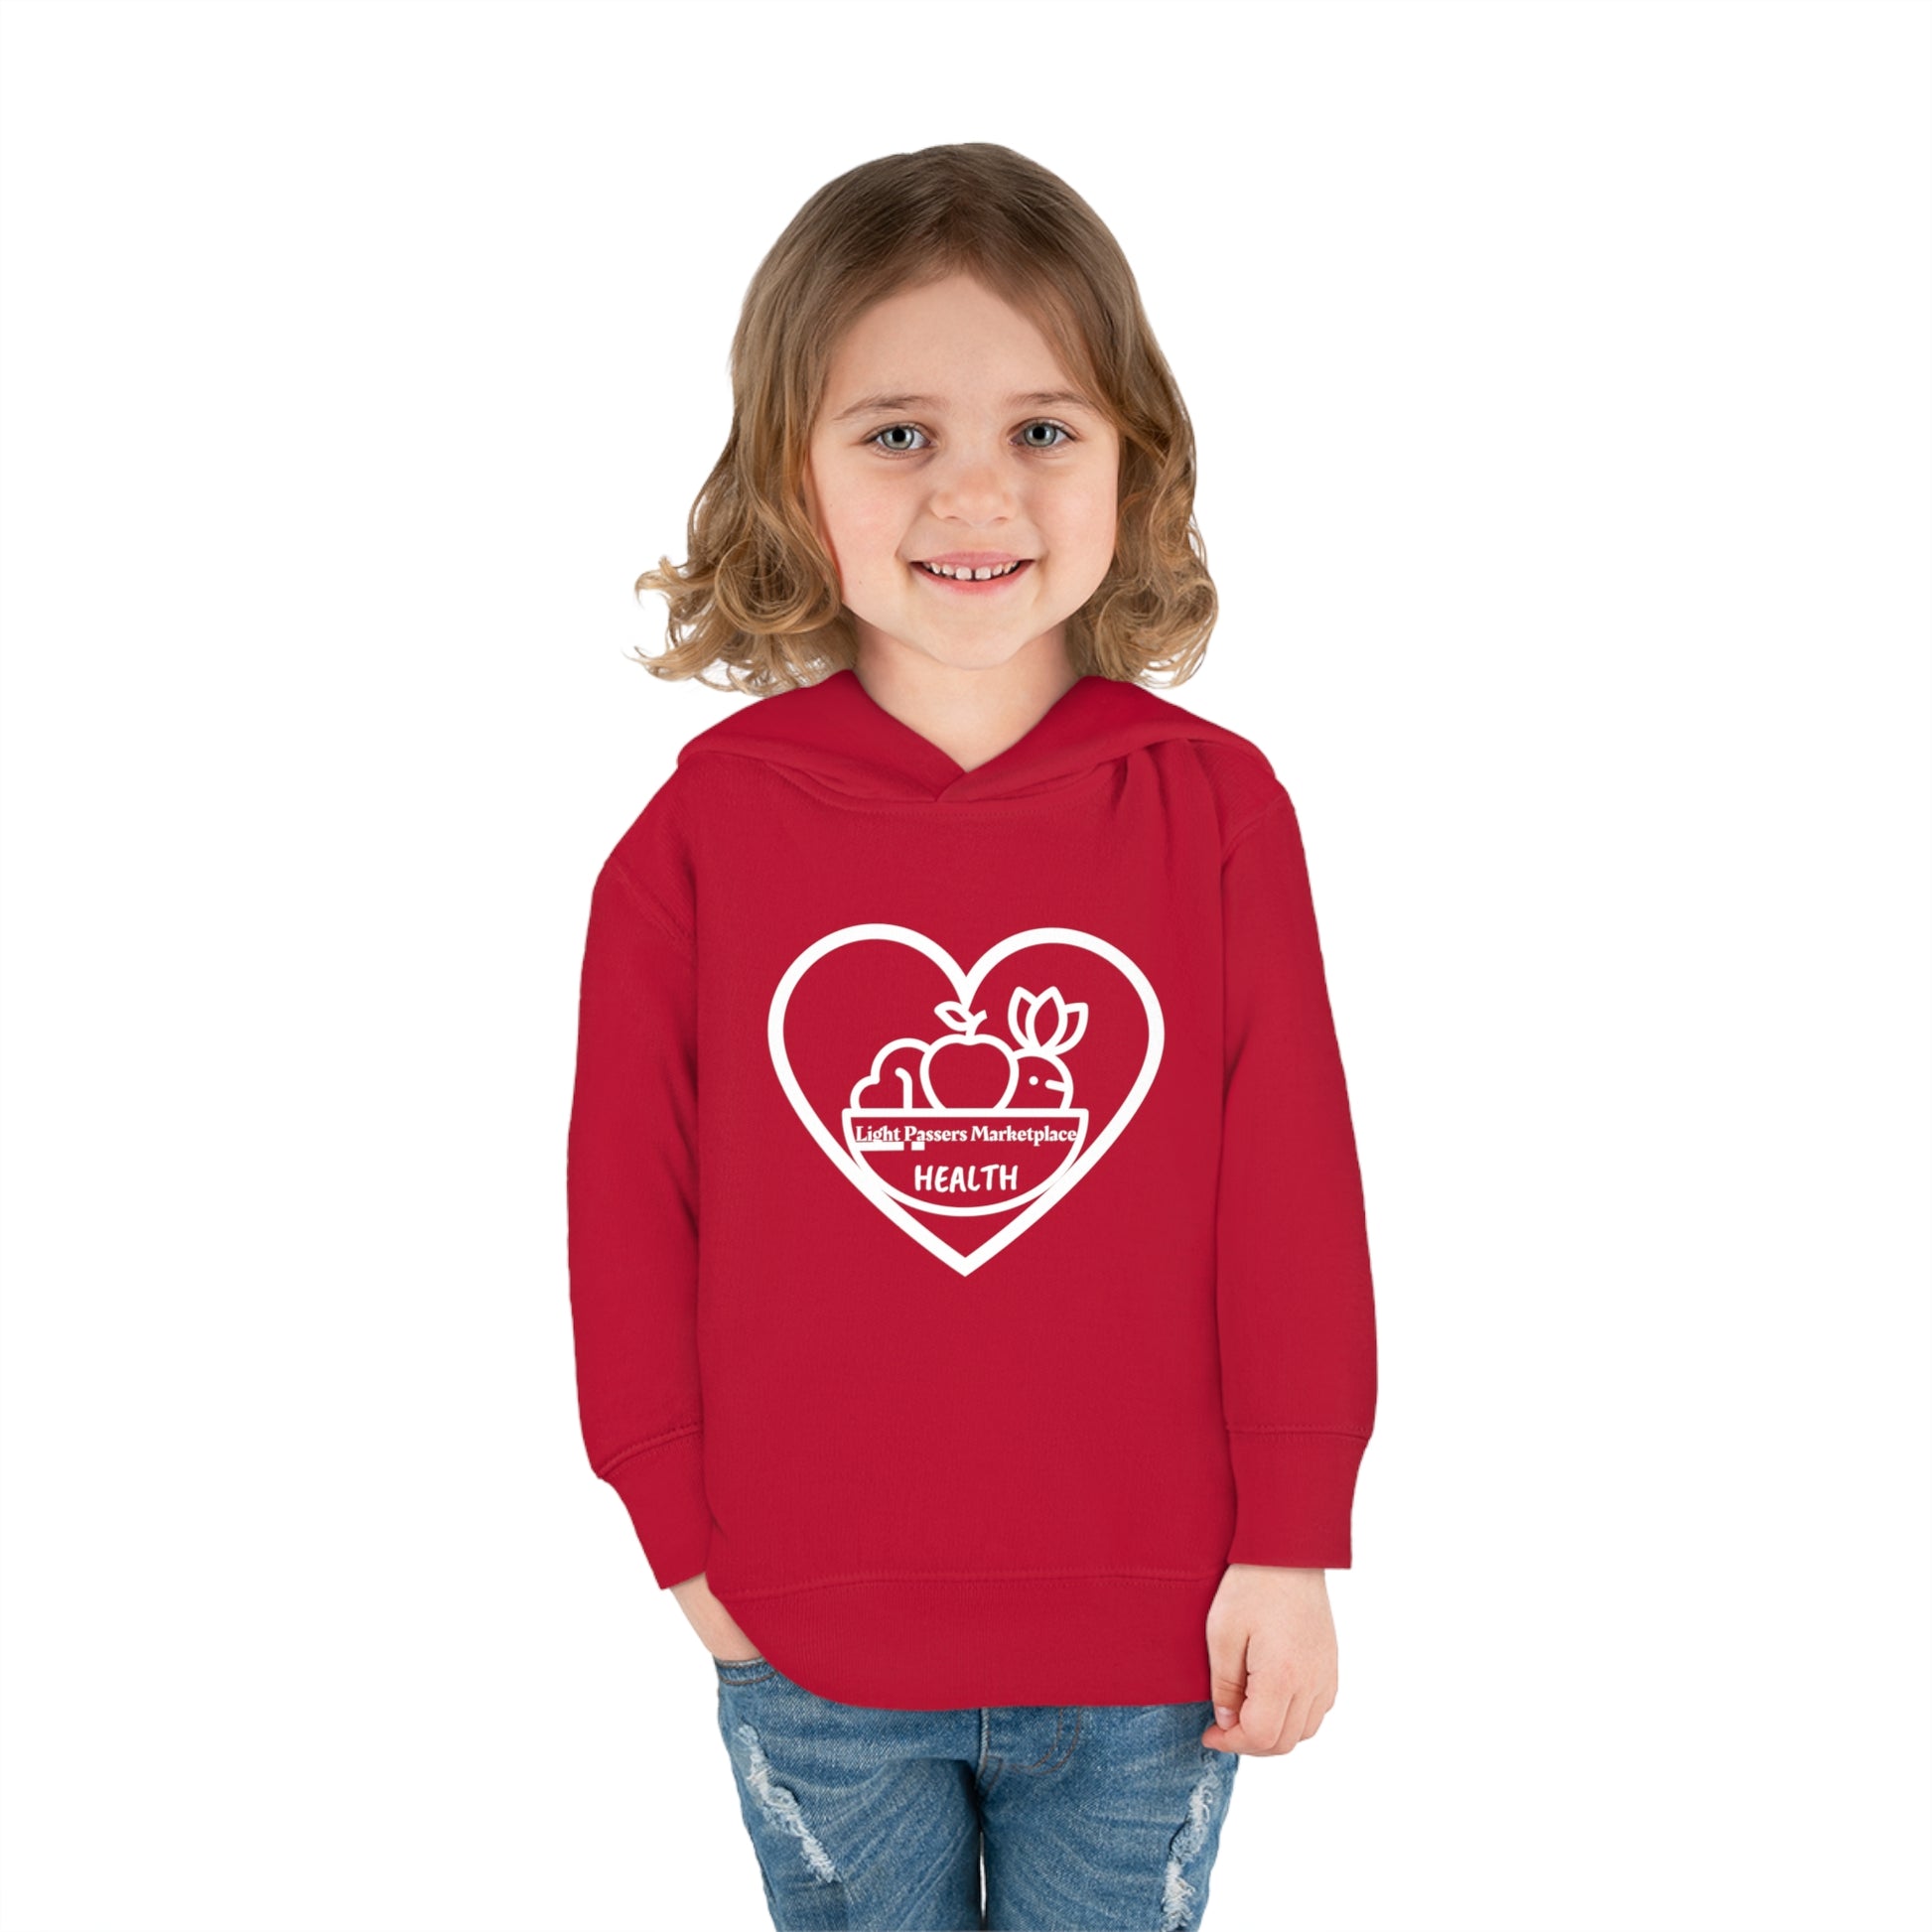 A smiling toddler in a red hoodie with side seam pockets. Features jersey-lined hood, cover-stitched details, and durable cotton-polyester blend for cozy wear.